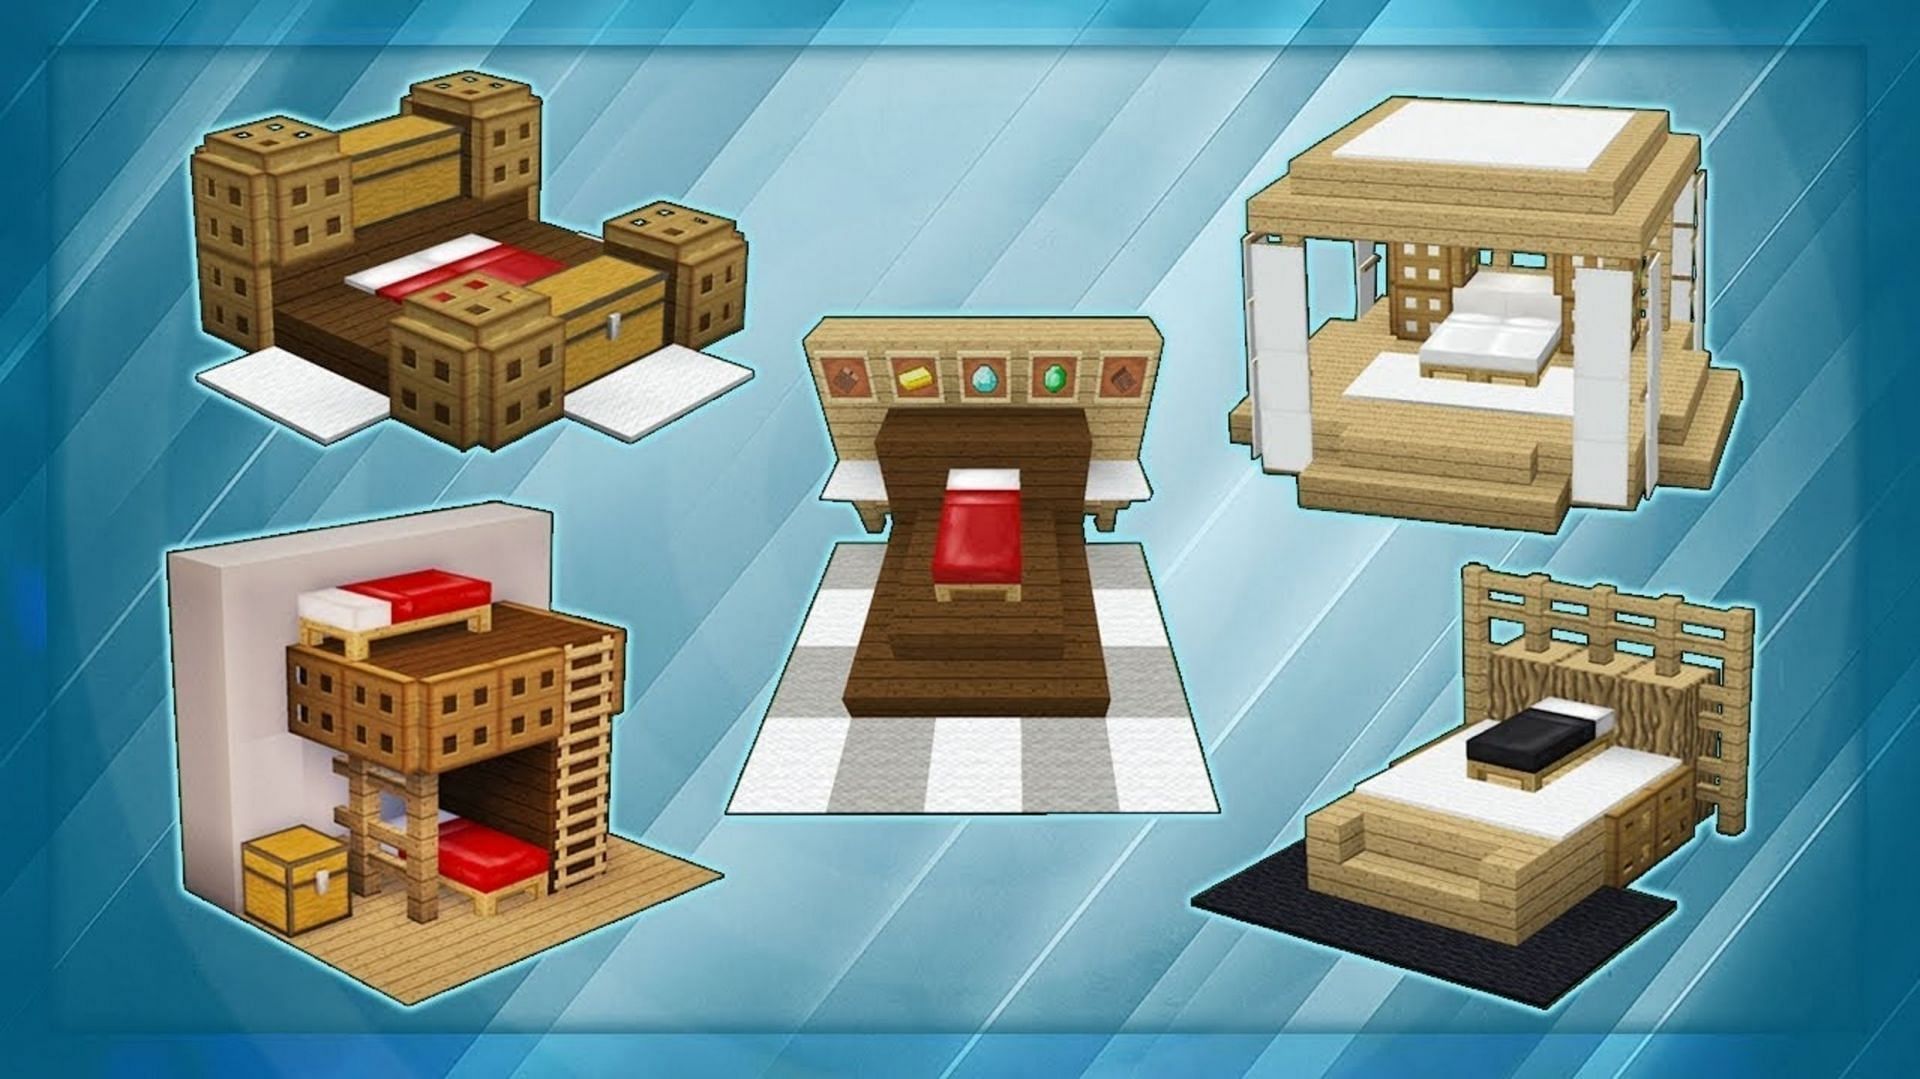 A little decoration around a bed can go a long way (Image via Greg Builds/YouTube)